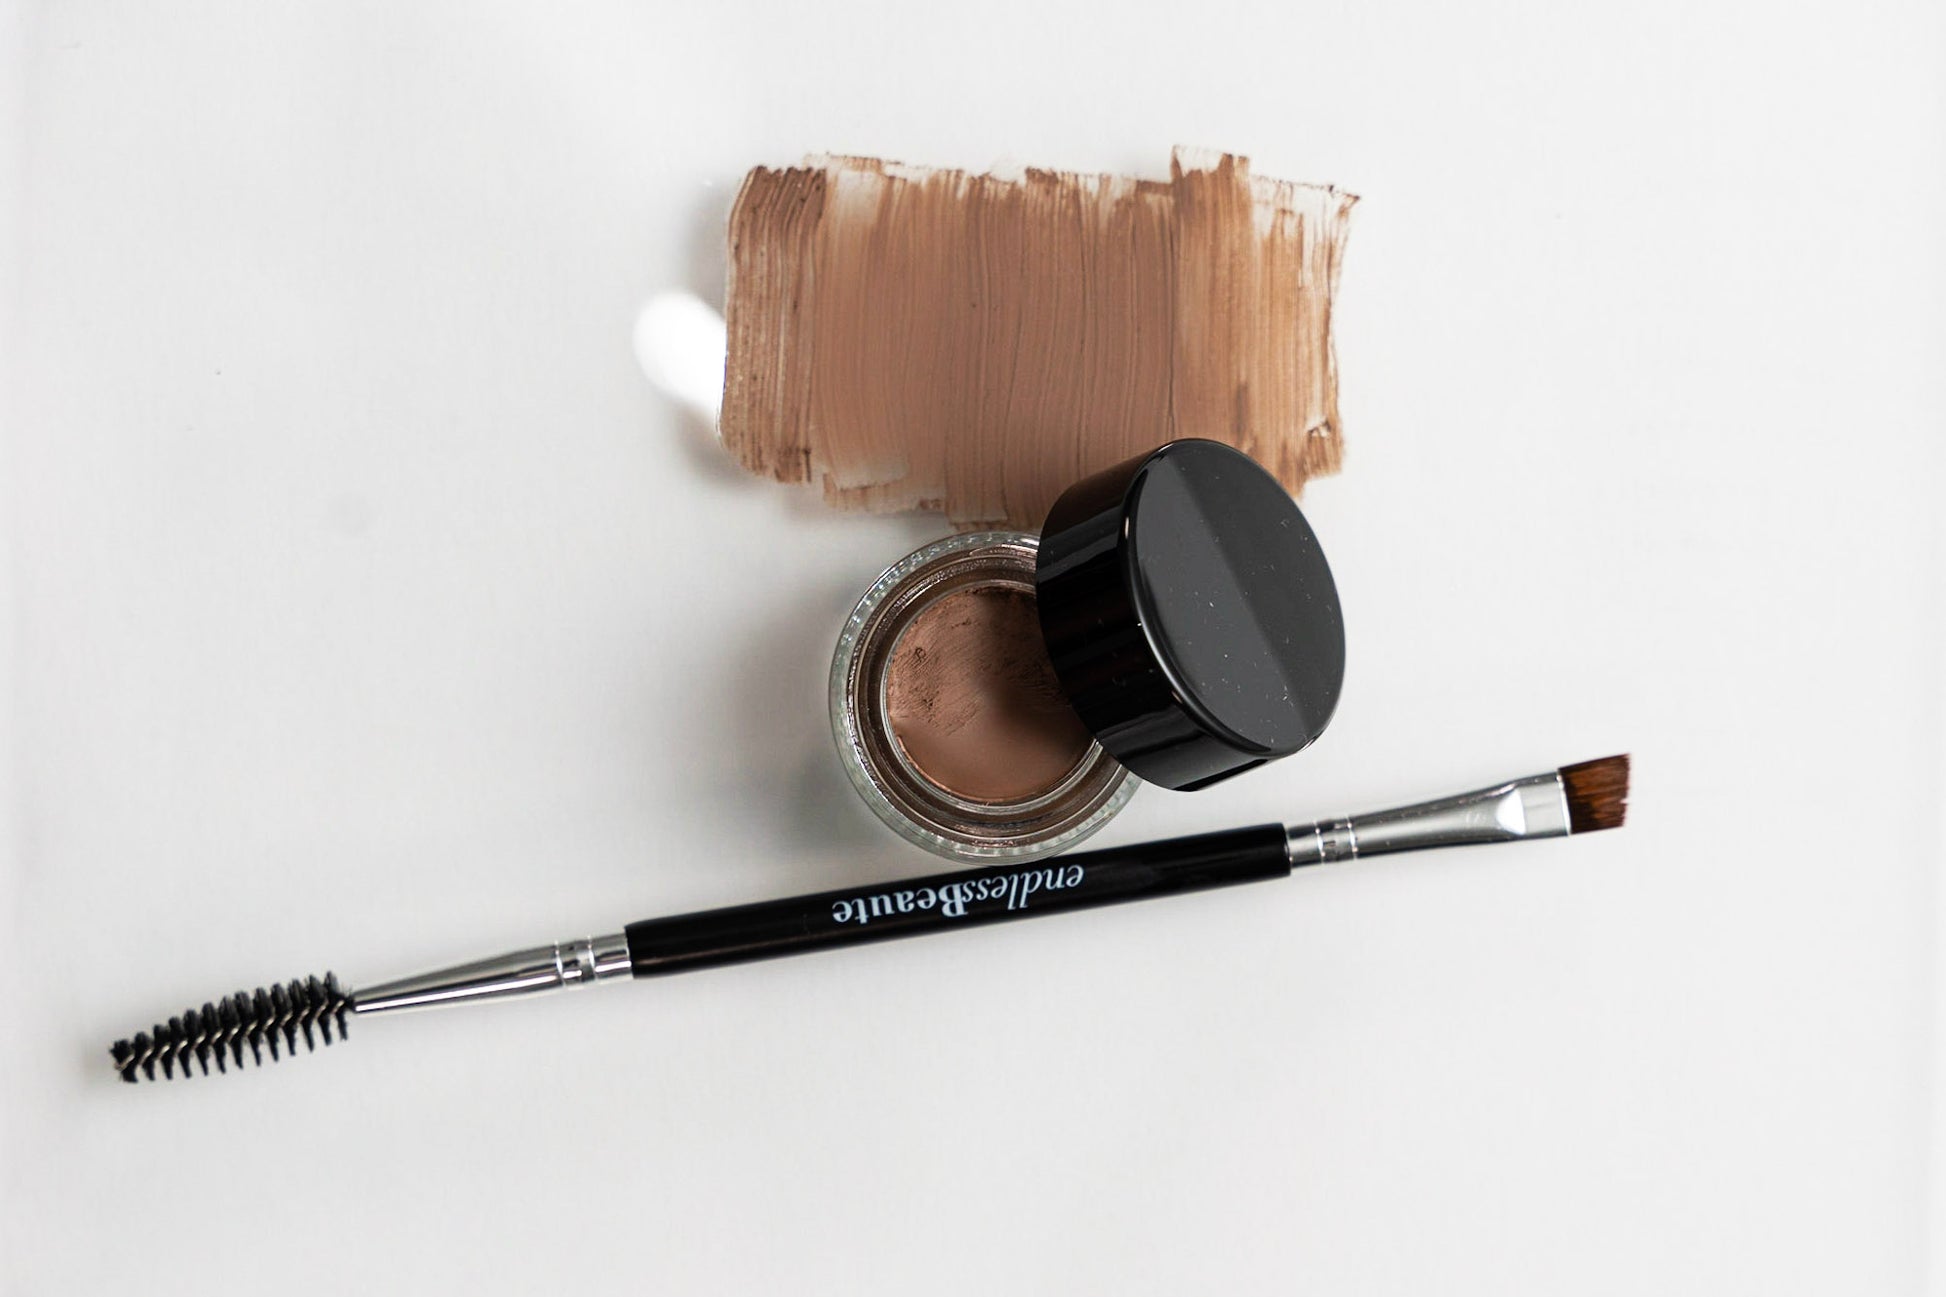 Beaute Brow Pomade - Endless Beaute